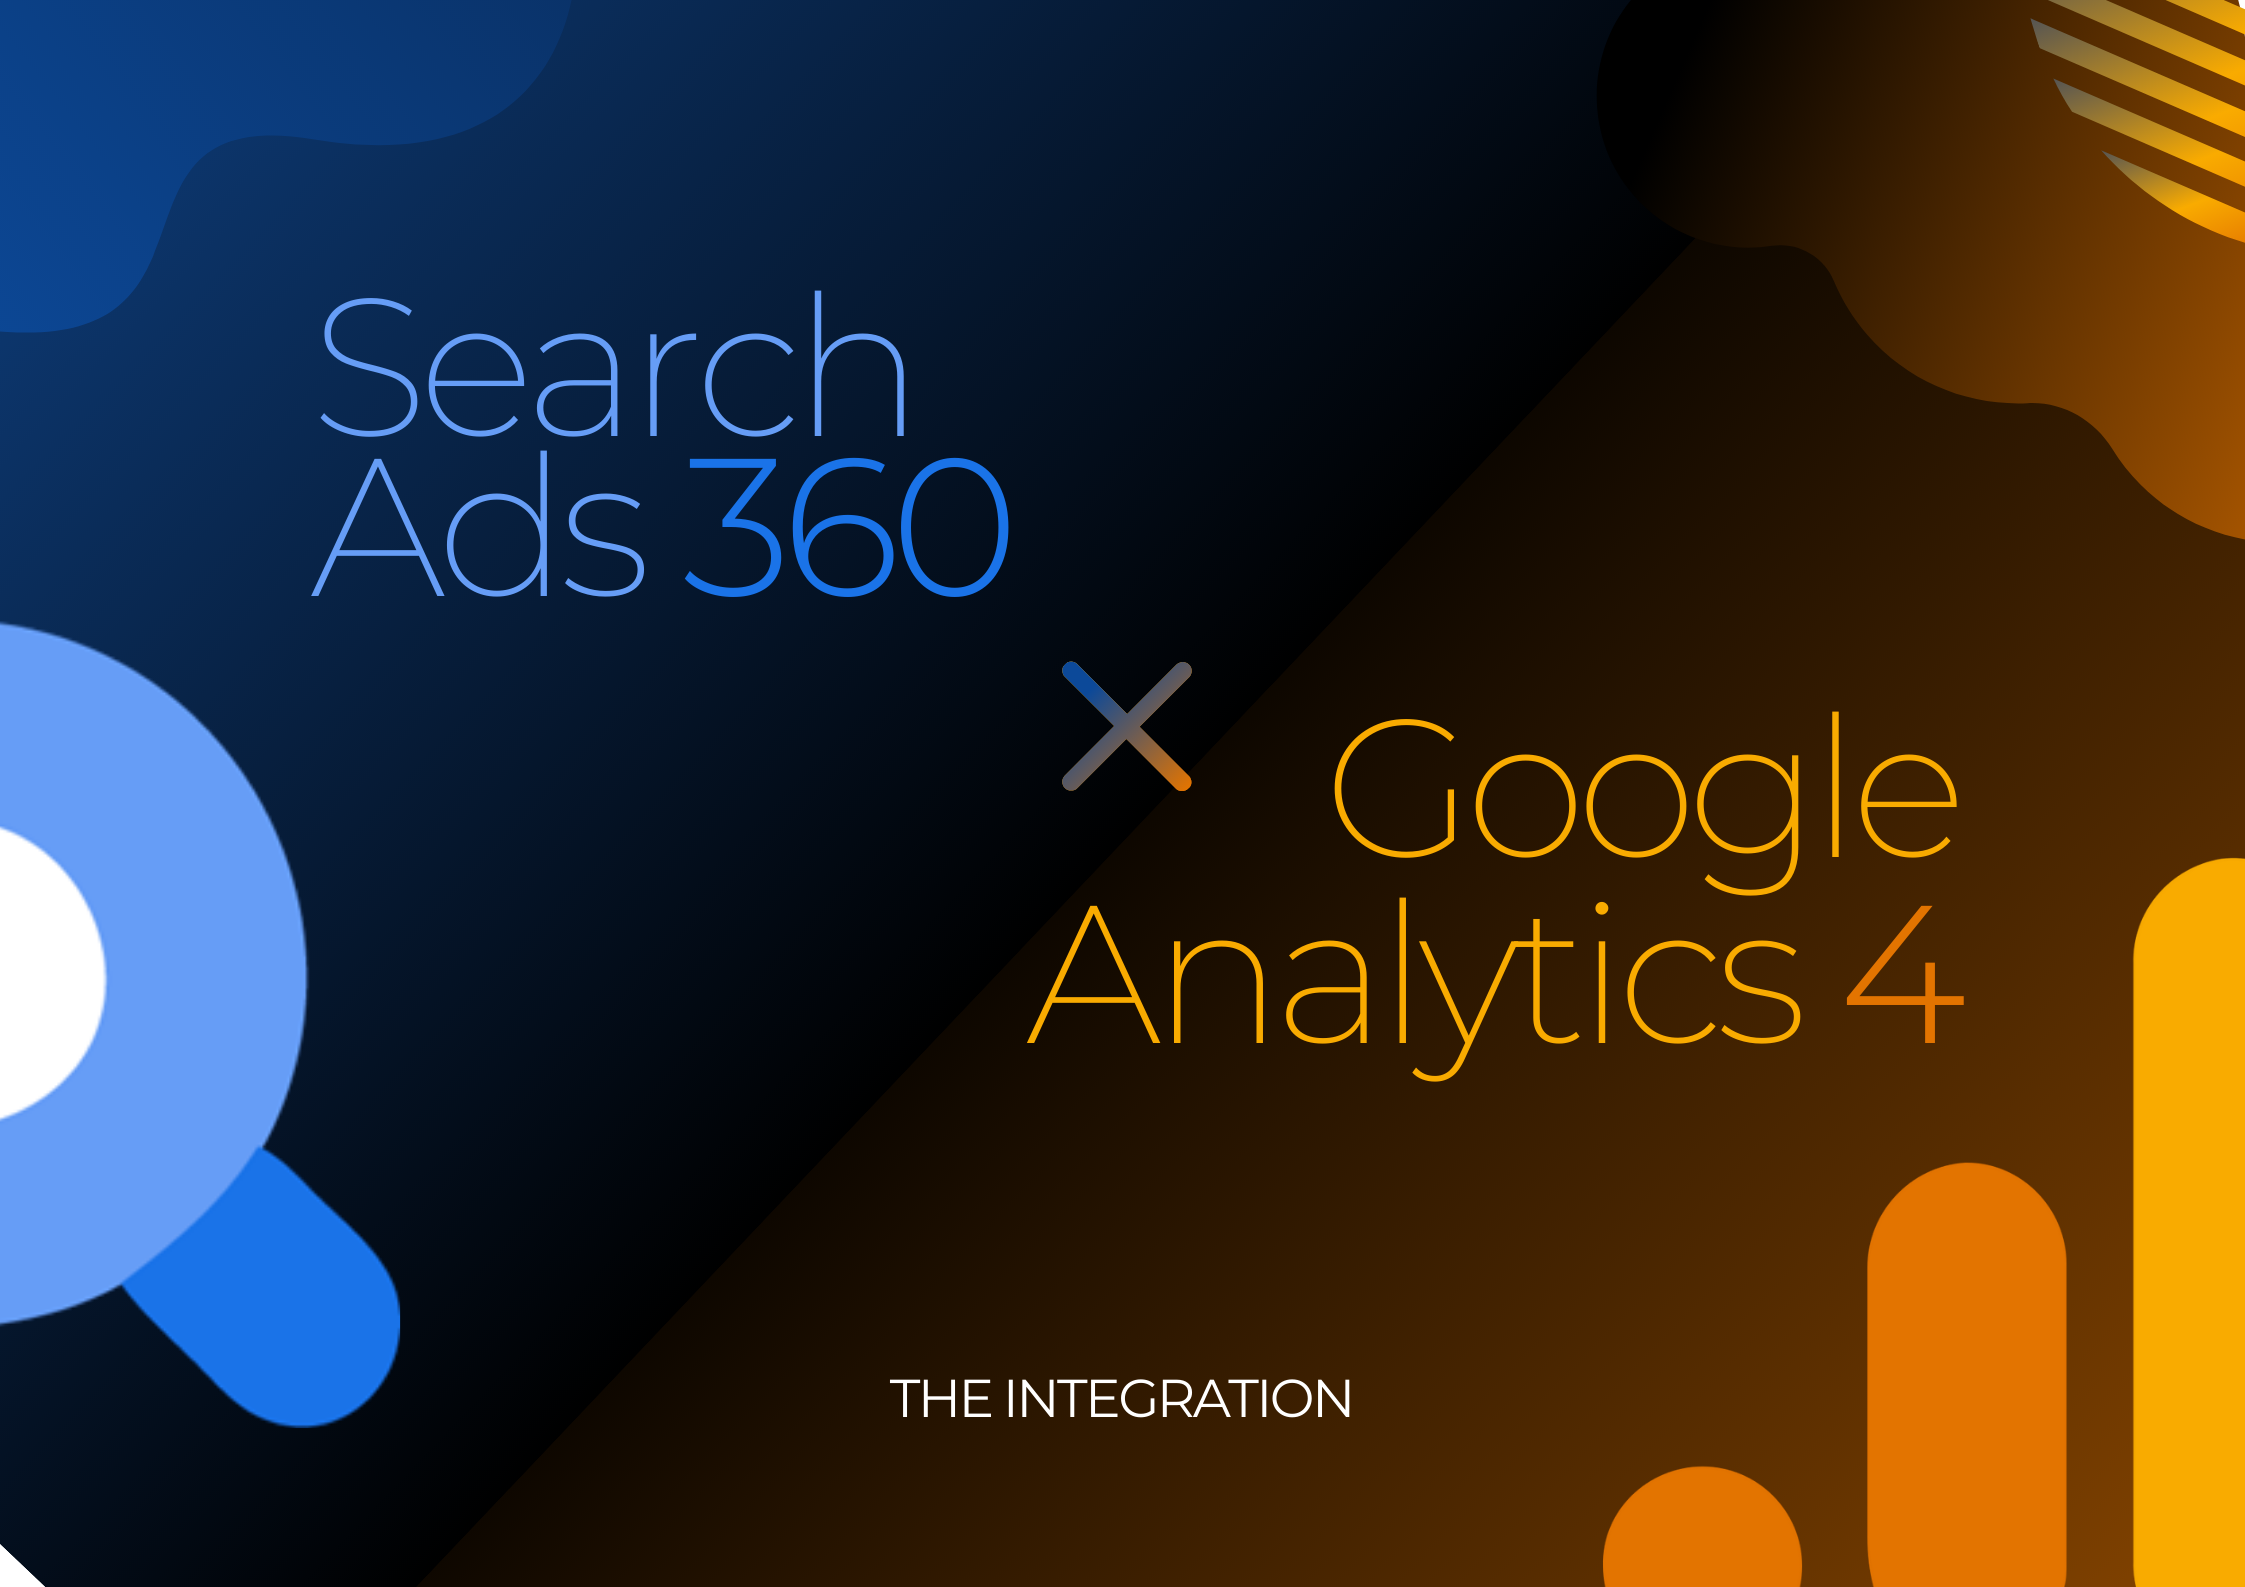 Search Ads and GA4 integration